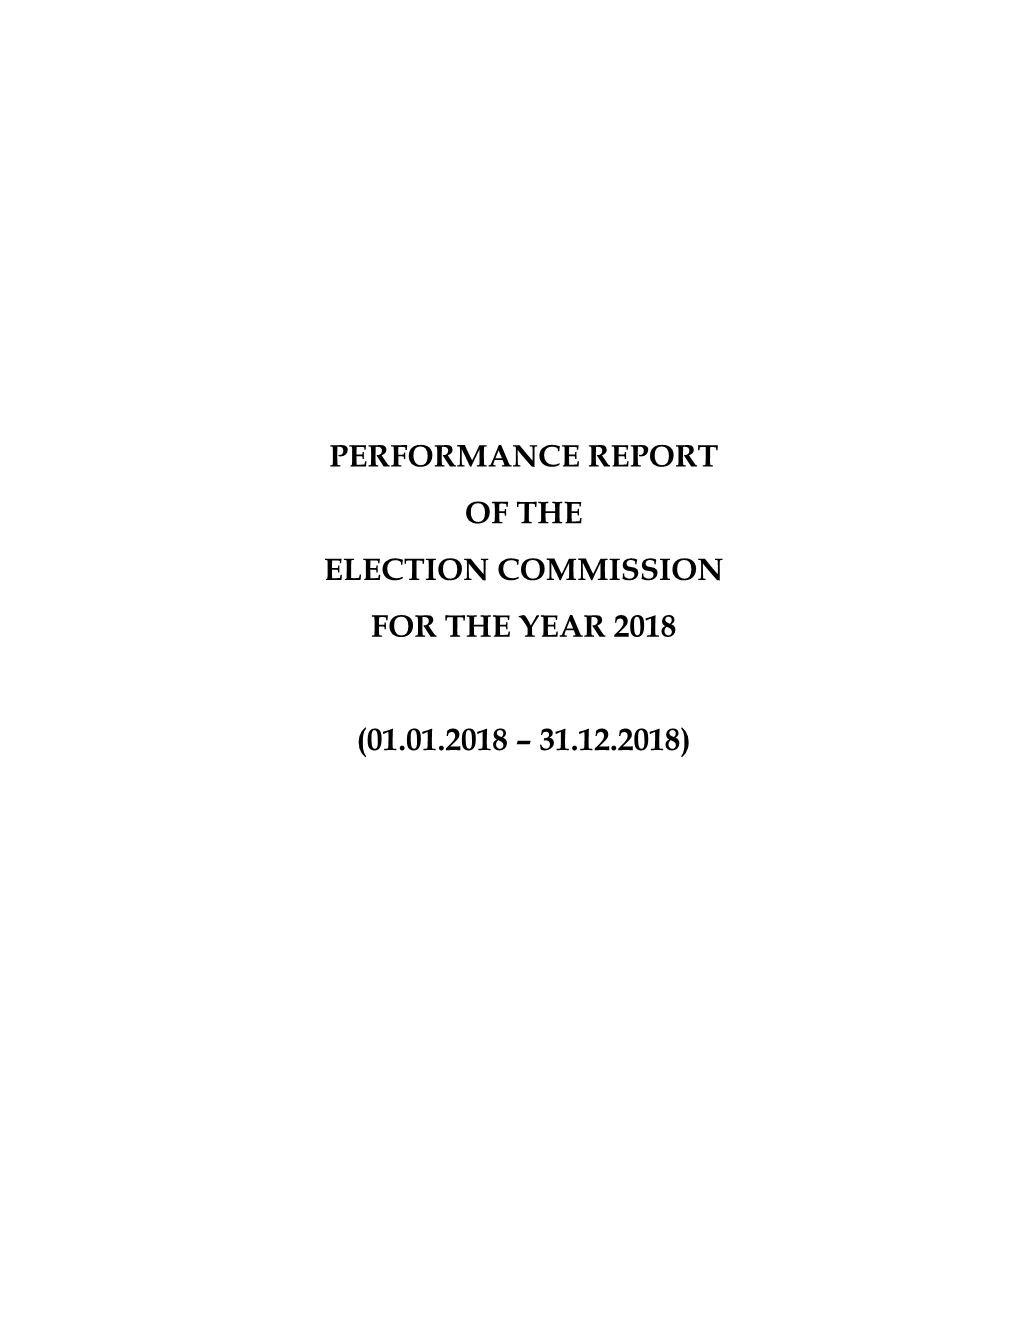 Performance Report of the Election Commission for the Year 2018